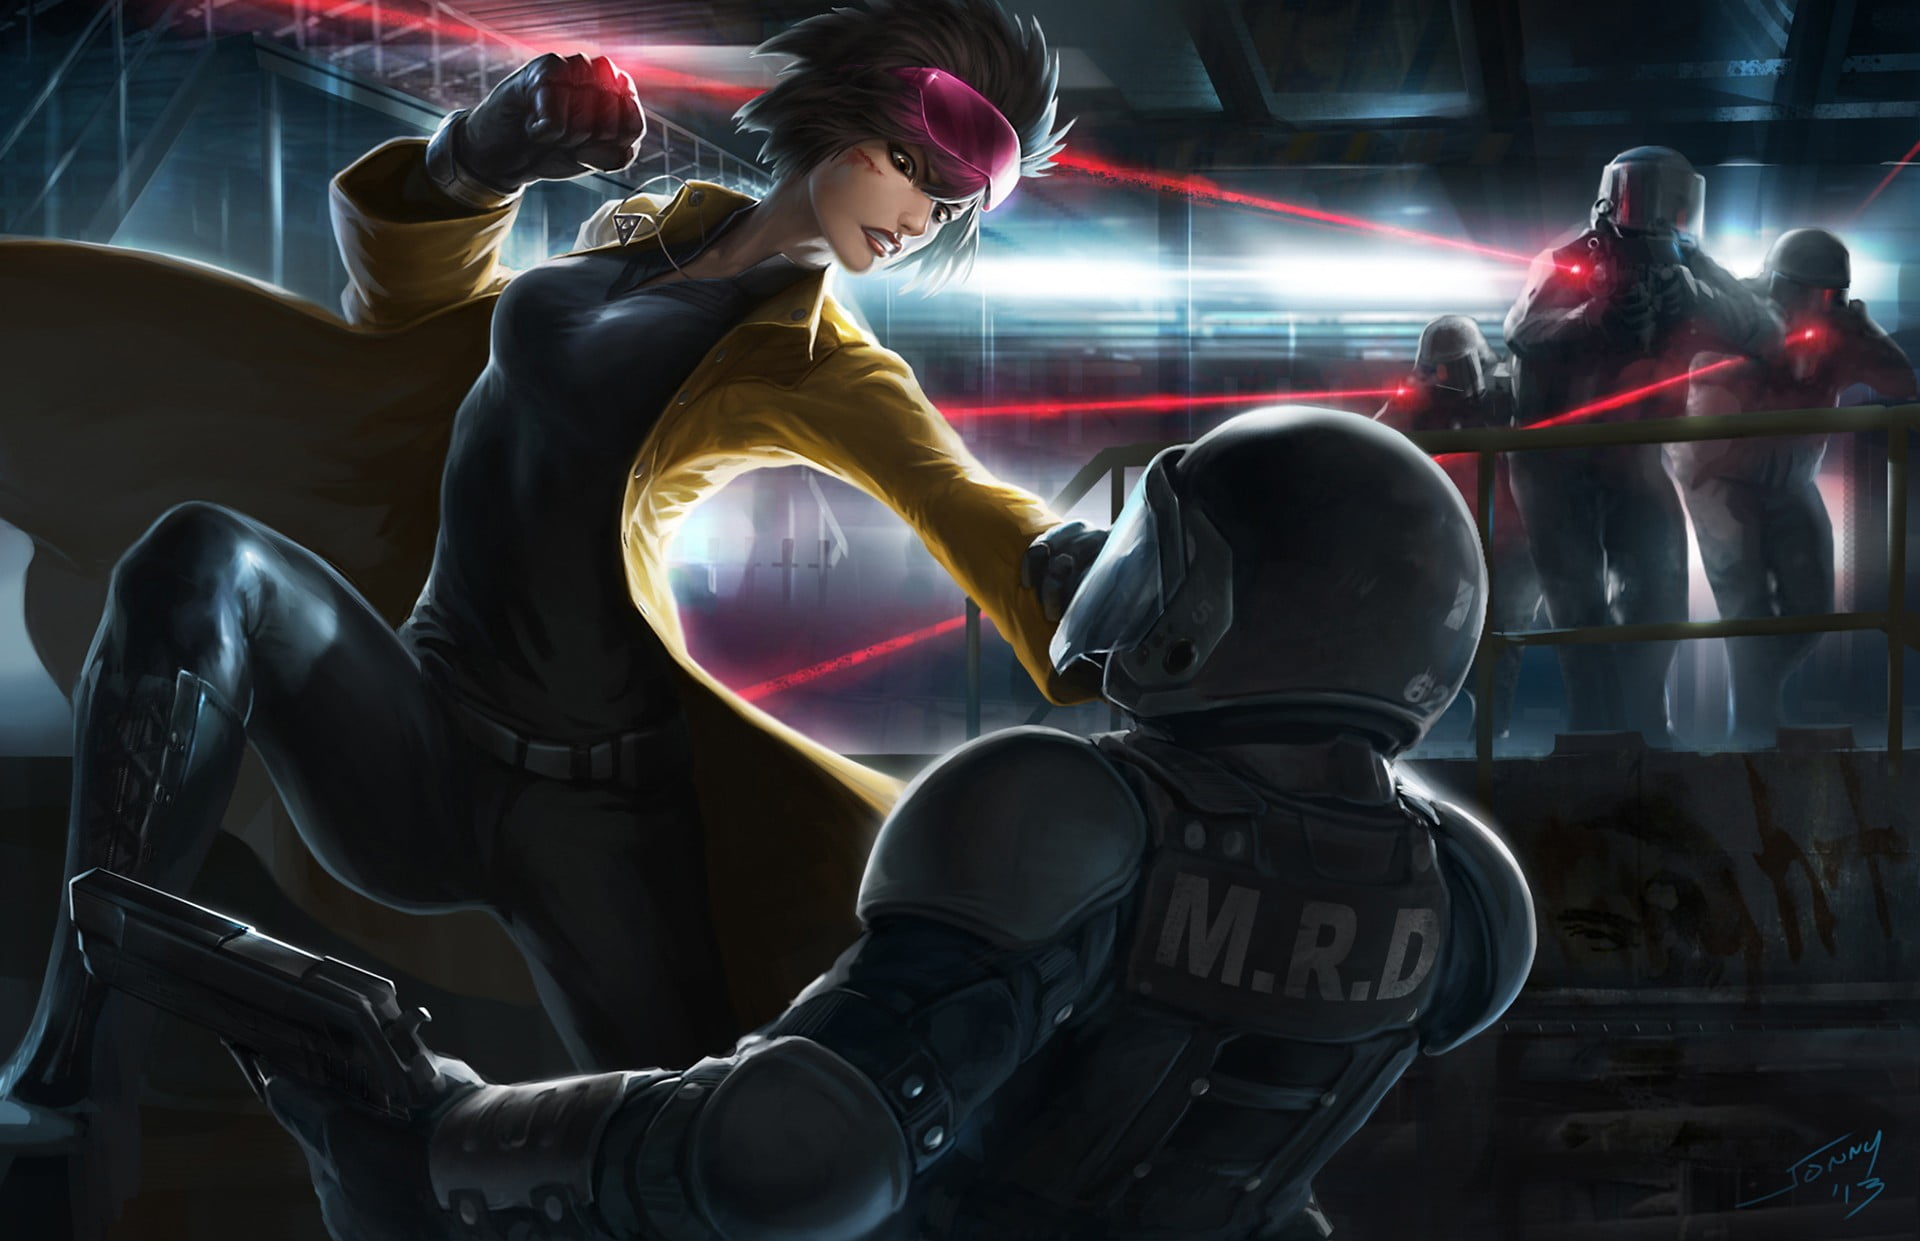 rouge and police poster, fantasy art, cyberpunk, soldier, Jubilee